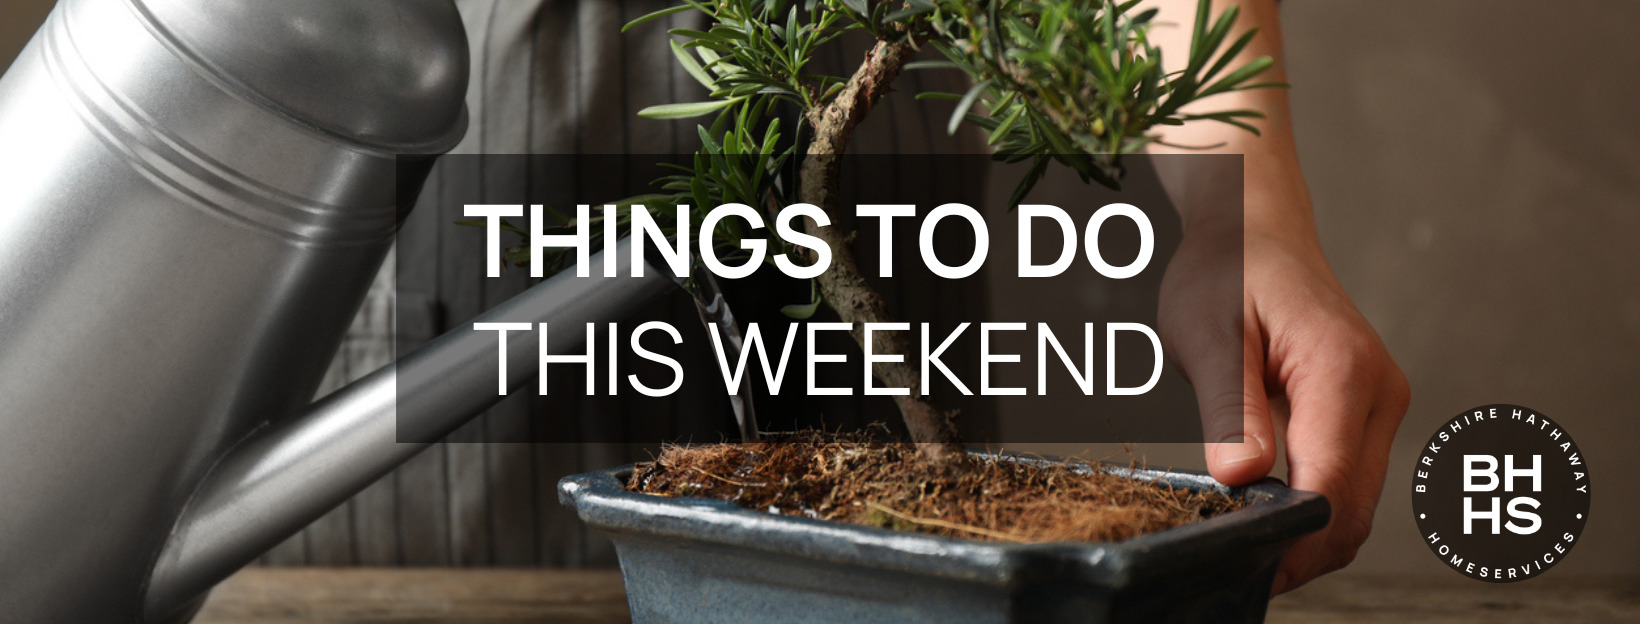 Things To Do This Weekend 